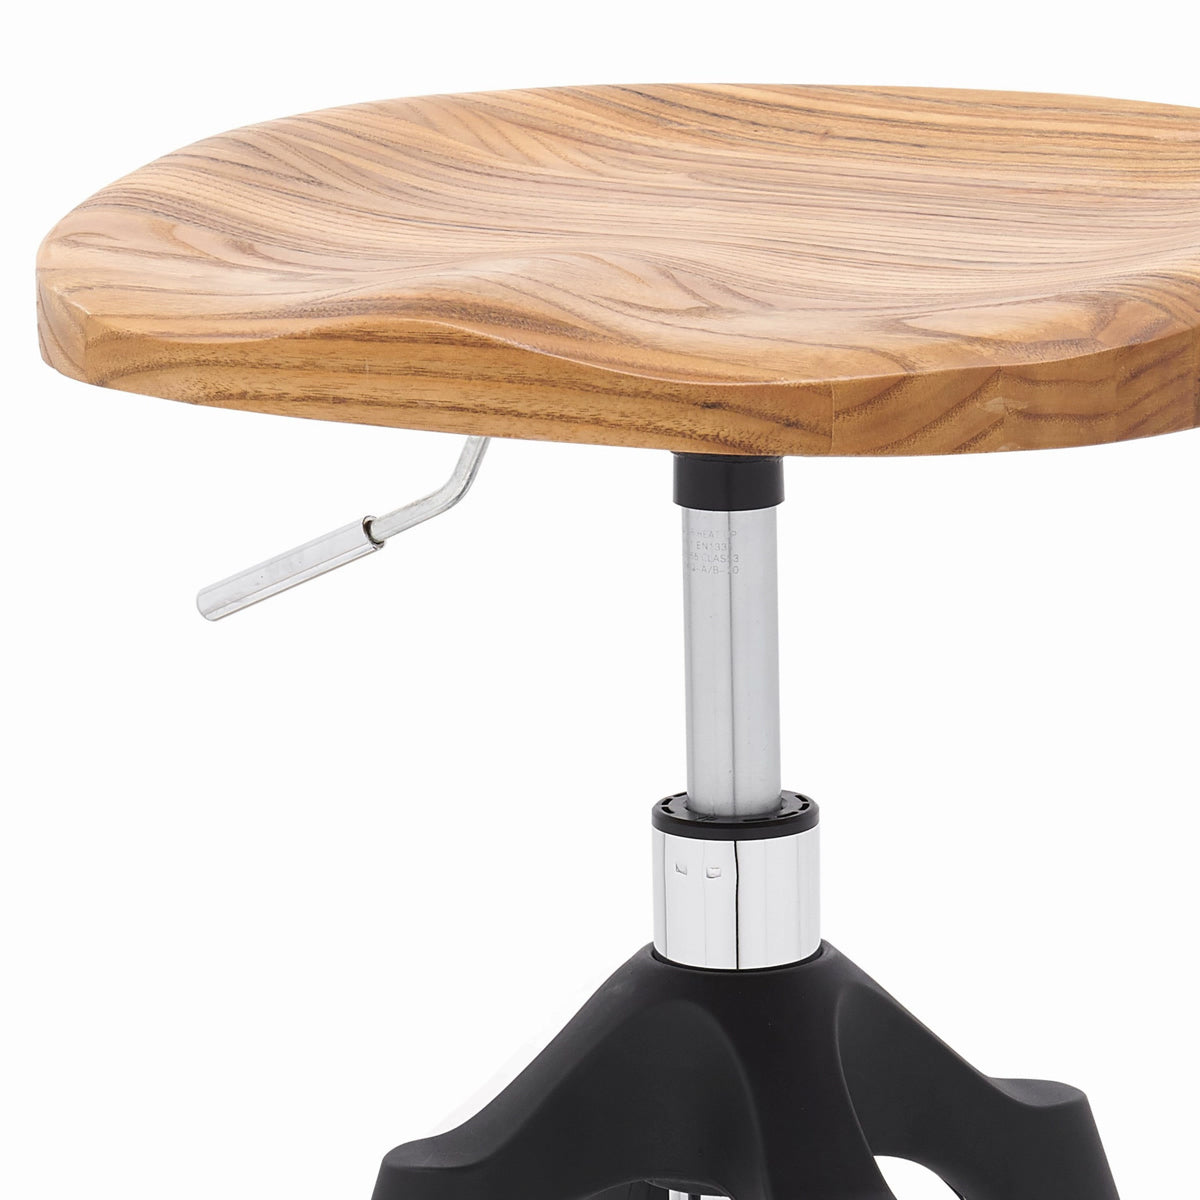 Elton Wood Top Metal Swivel Backless Stool - Set of 2 by New Pacific Direct - 1350003-CH